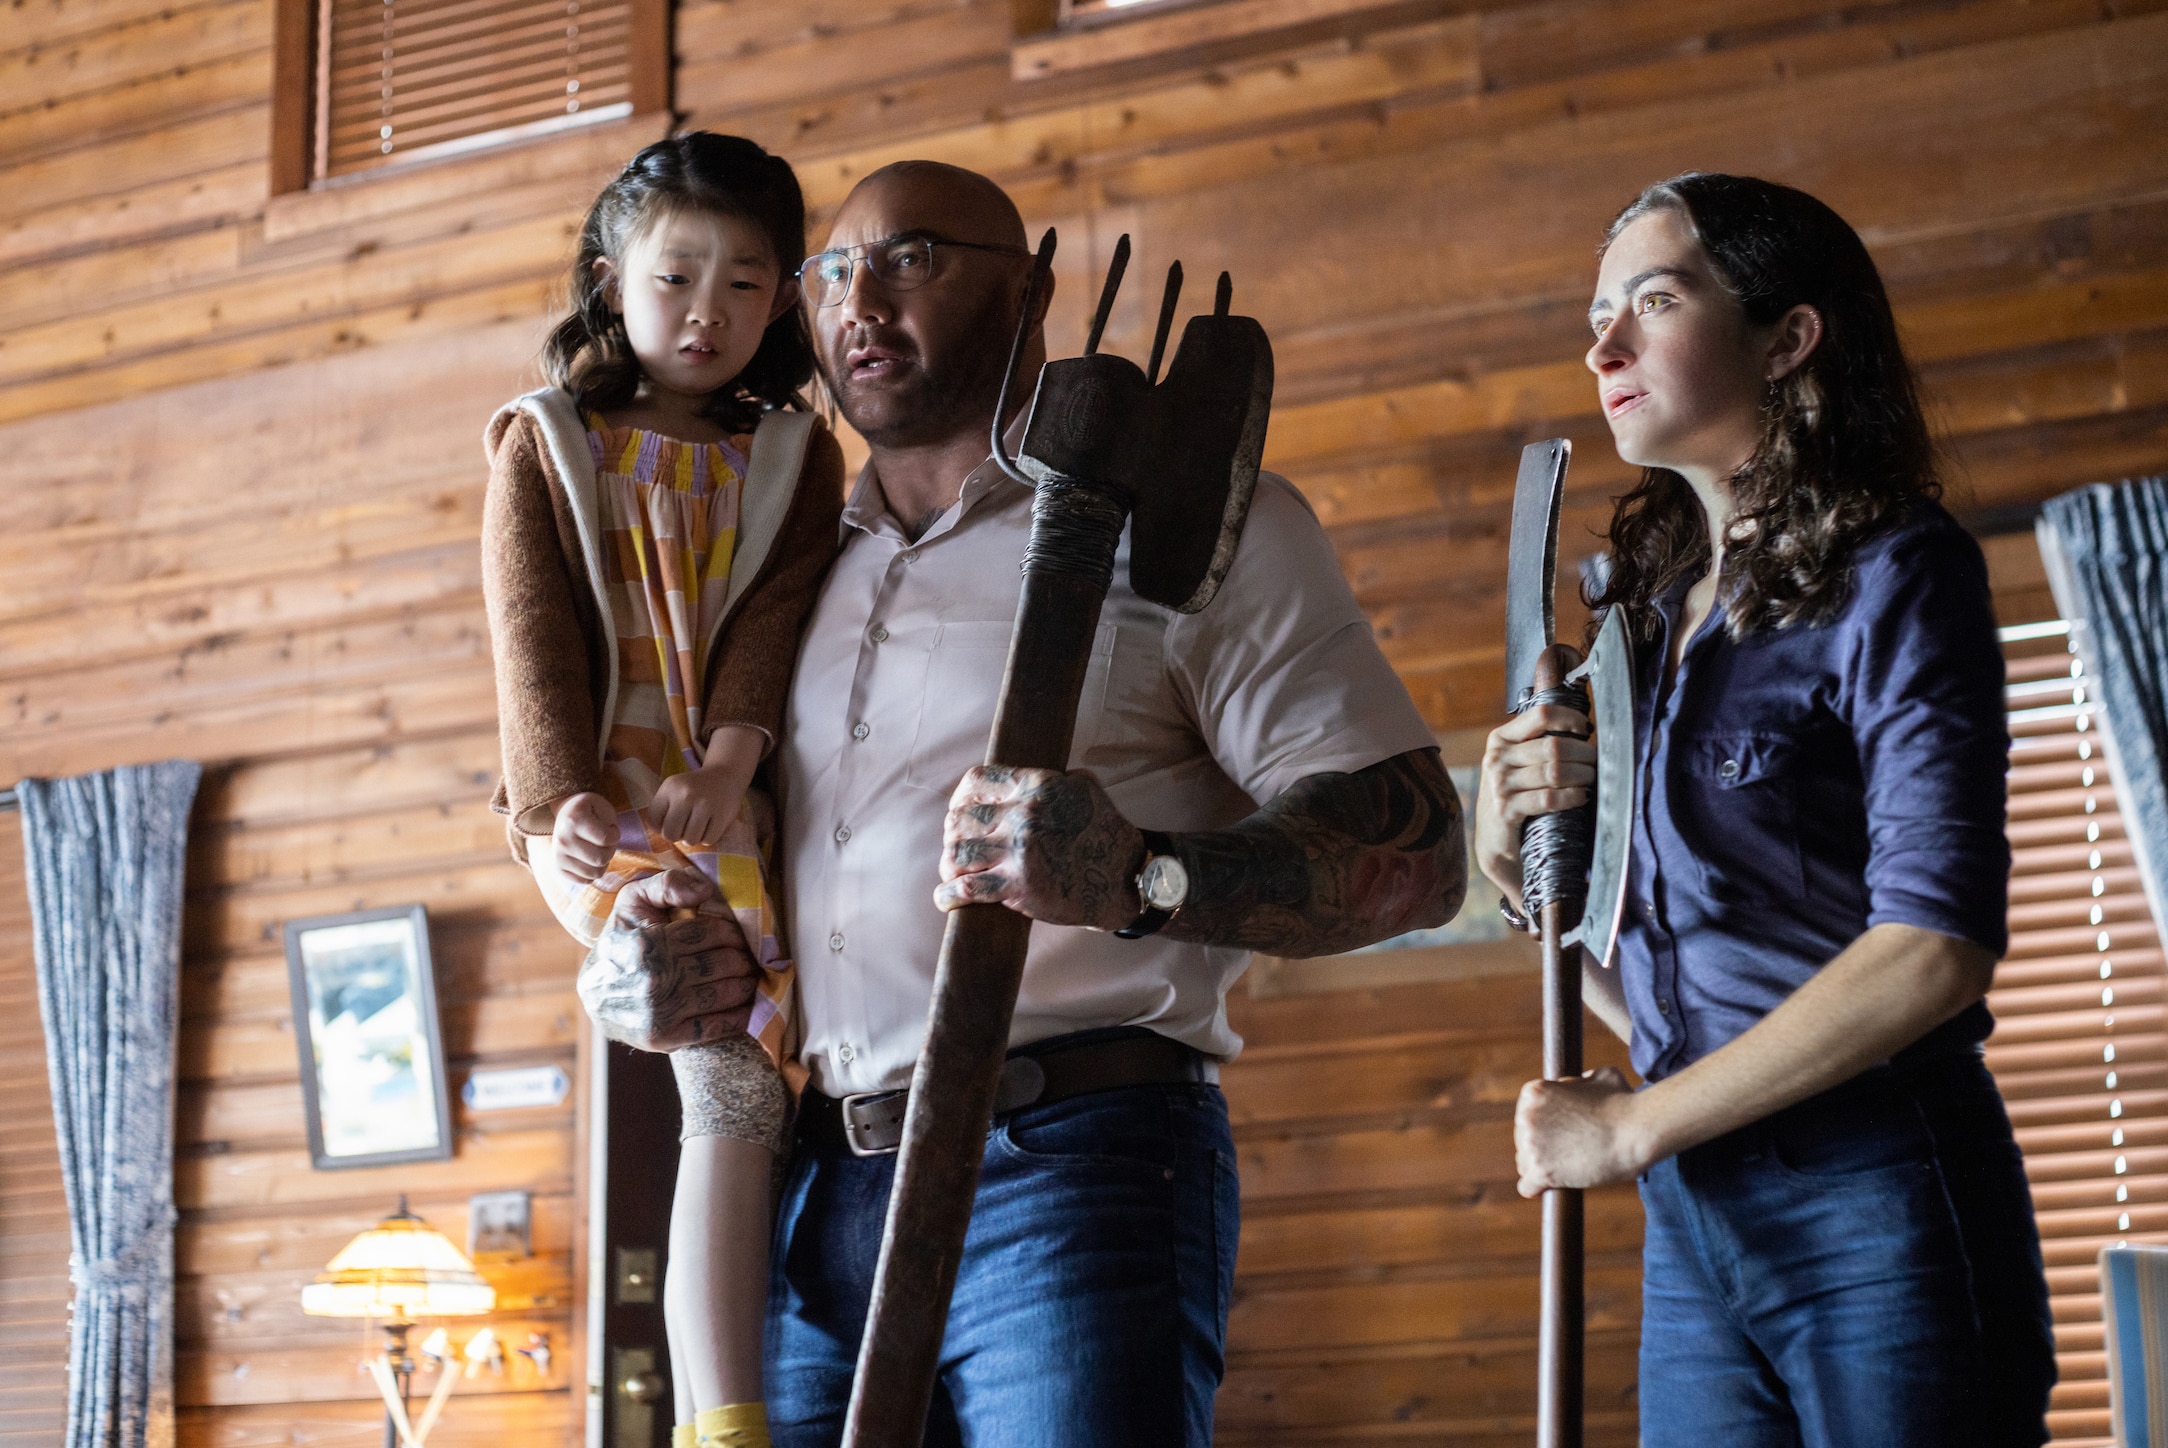 Dave Batista with Kristen Cui and Abby Quinn. Photo credit: Universal 'Knock At The Cabin'